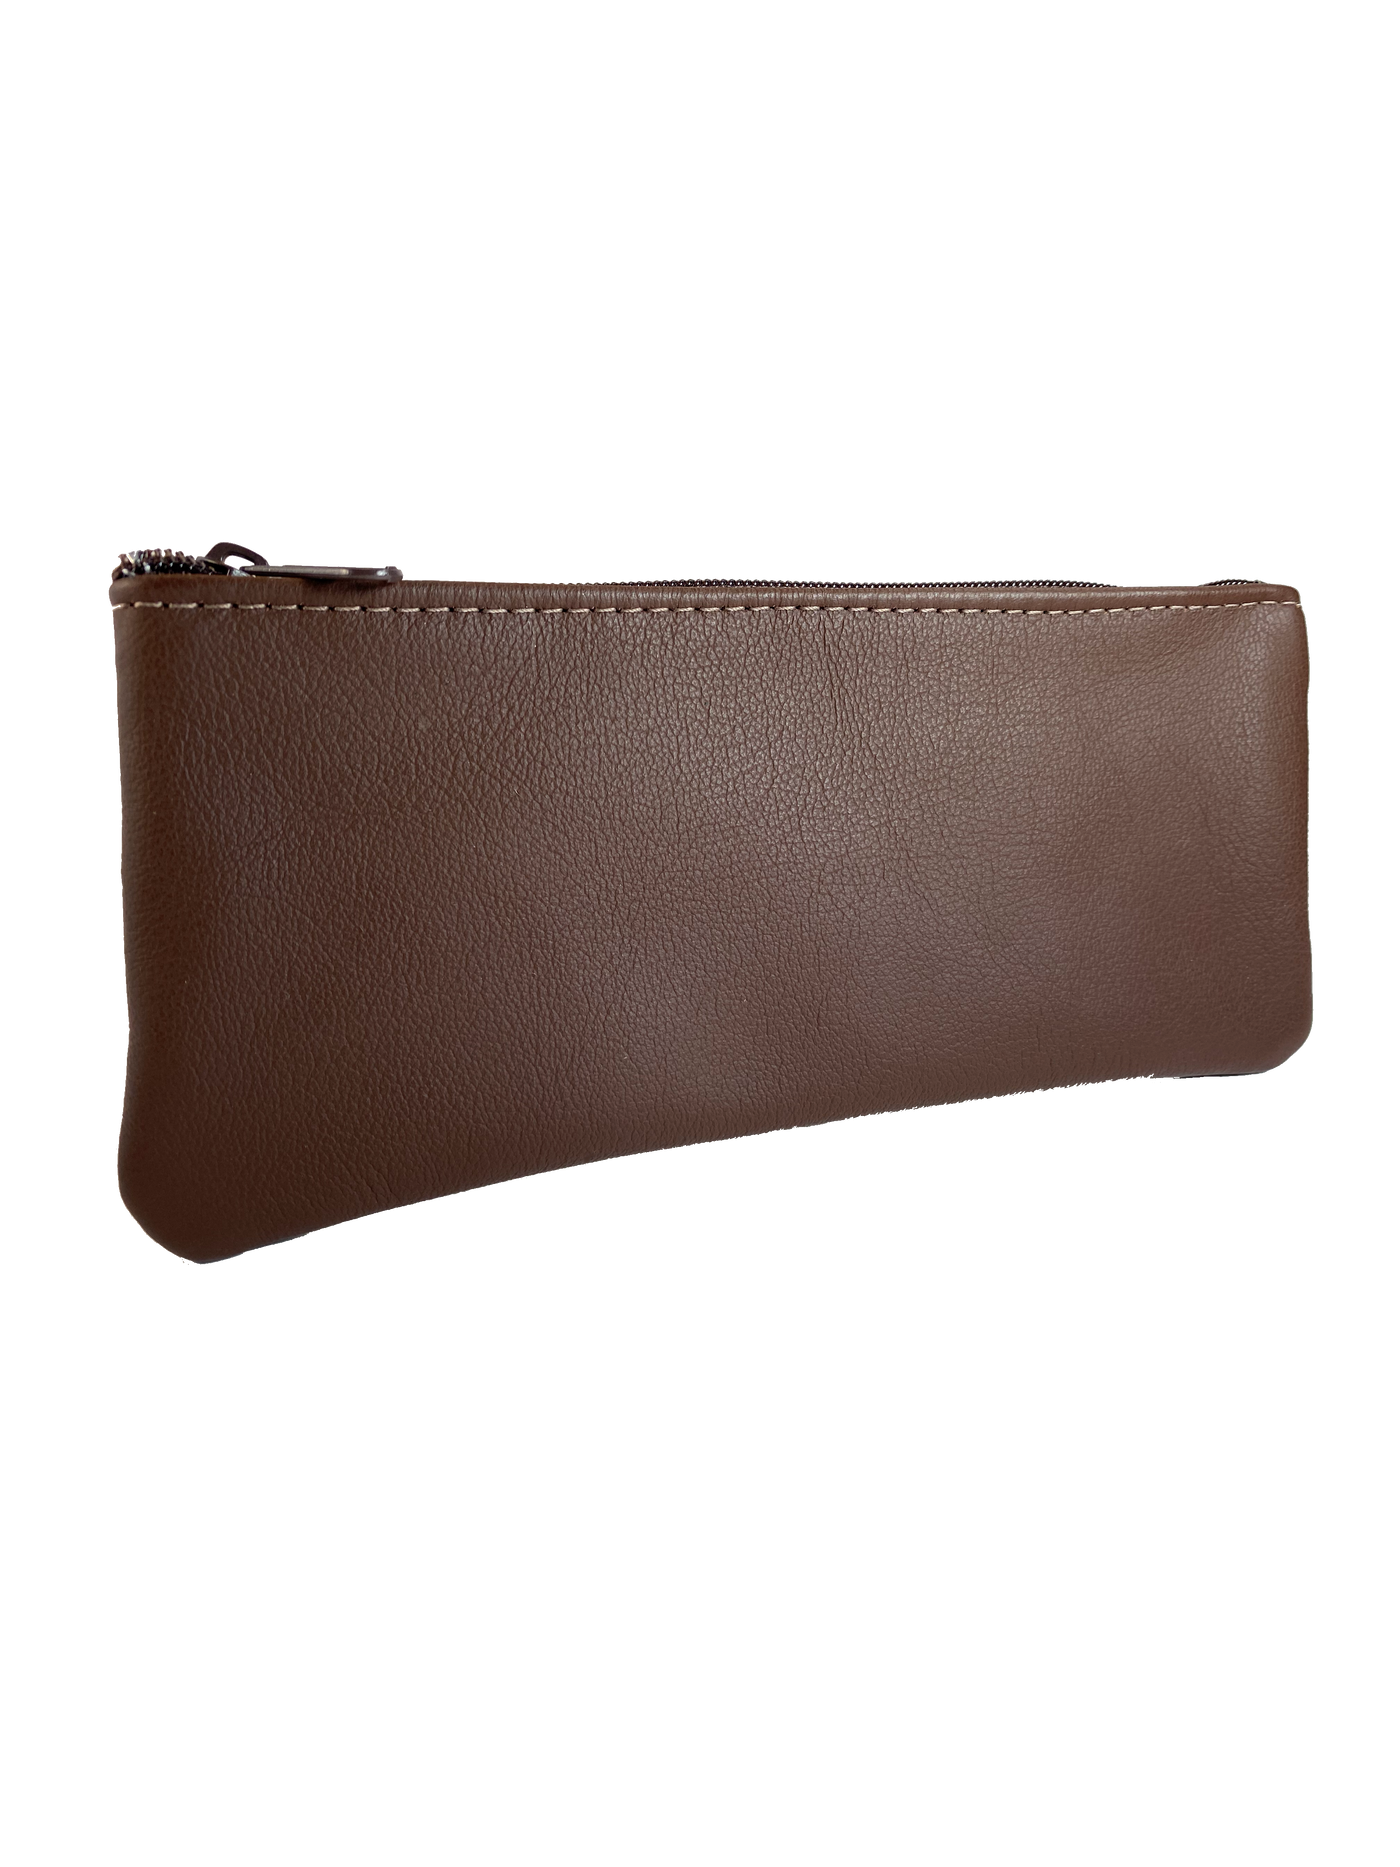 Large Leather Zippered Case. Great for carrying cash! Currently available in Brown. Sold at our shop in Smyrna, TN.